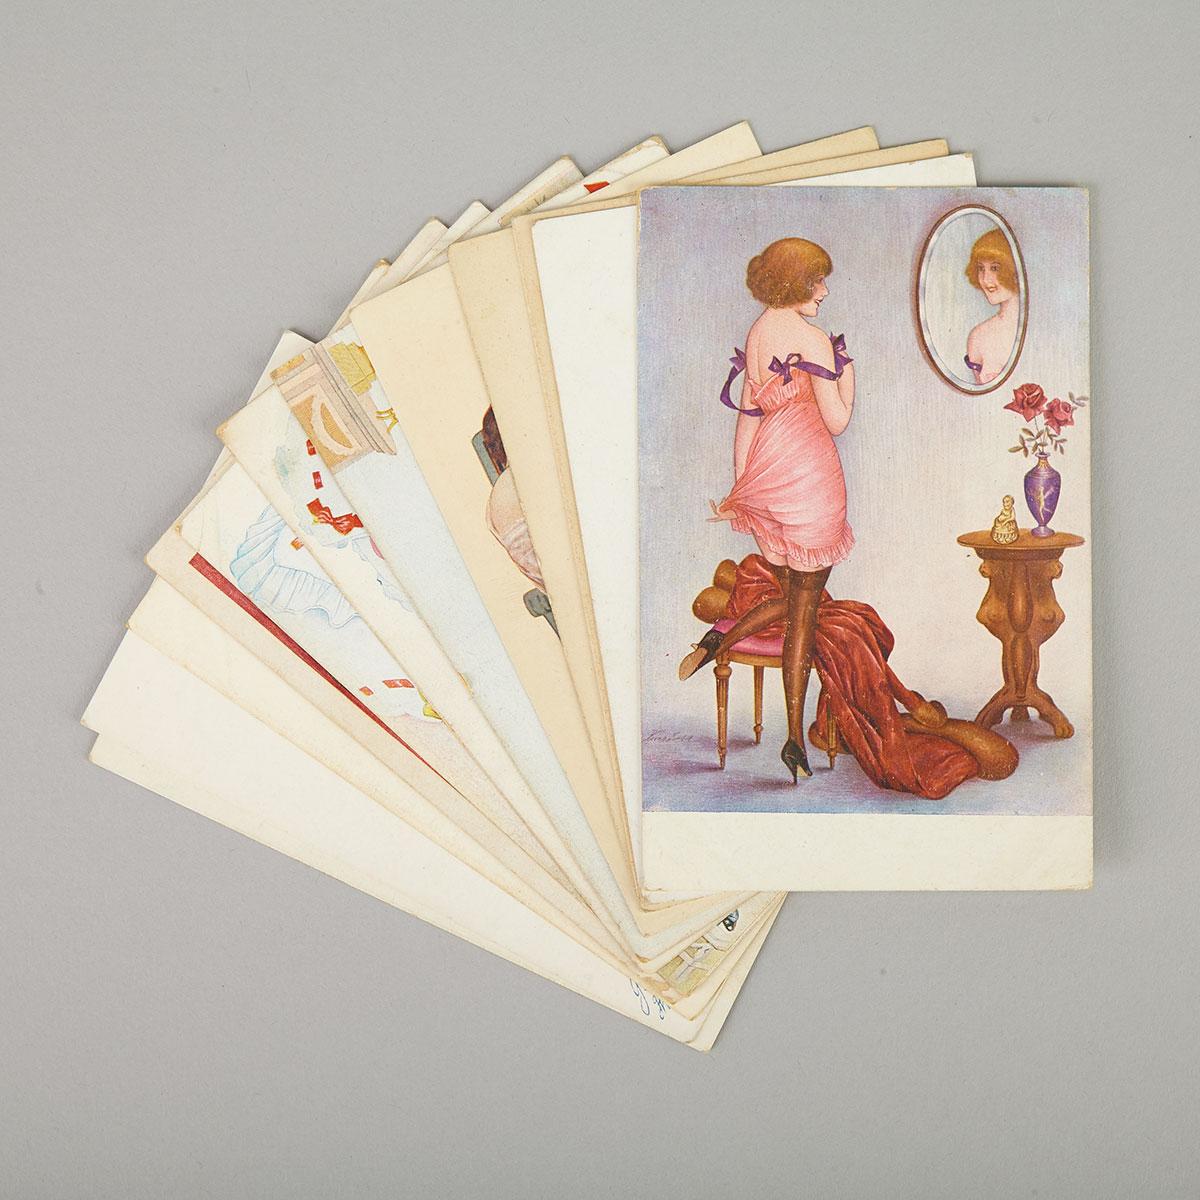 Xavier Sager (French, 1870-1930) Collection of 12 Post Cards, early 19th century